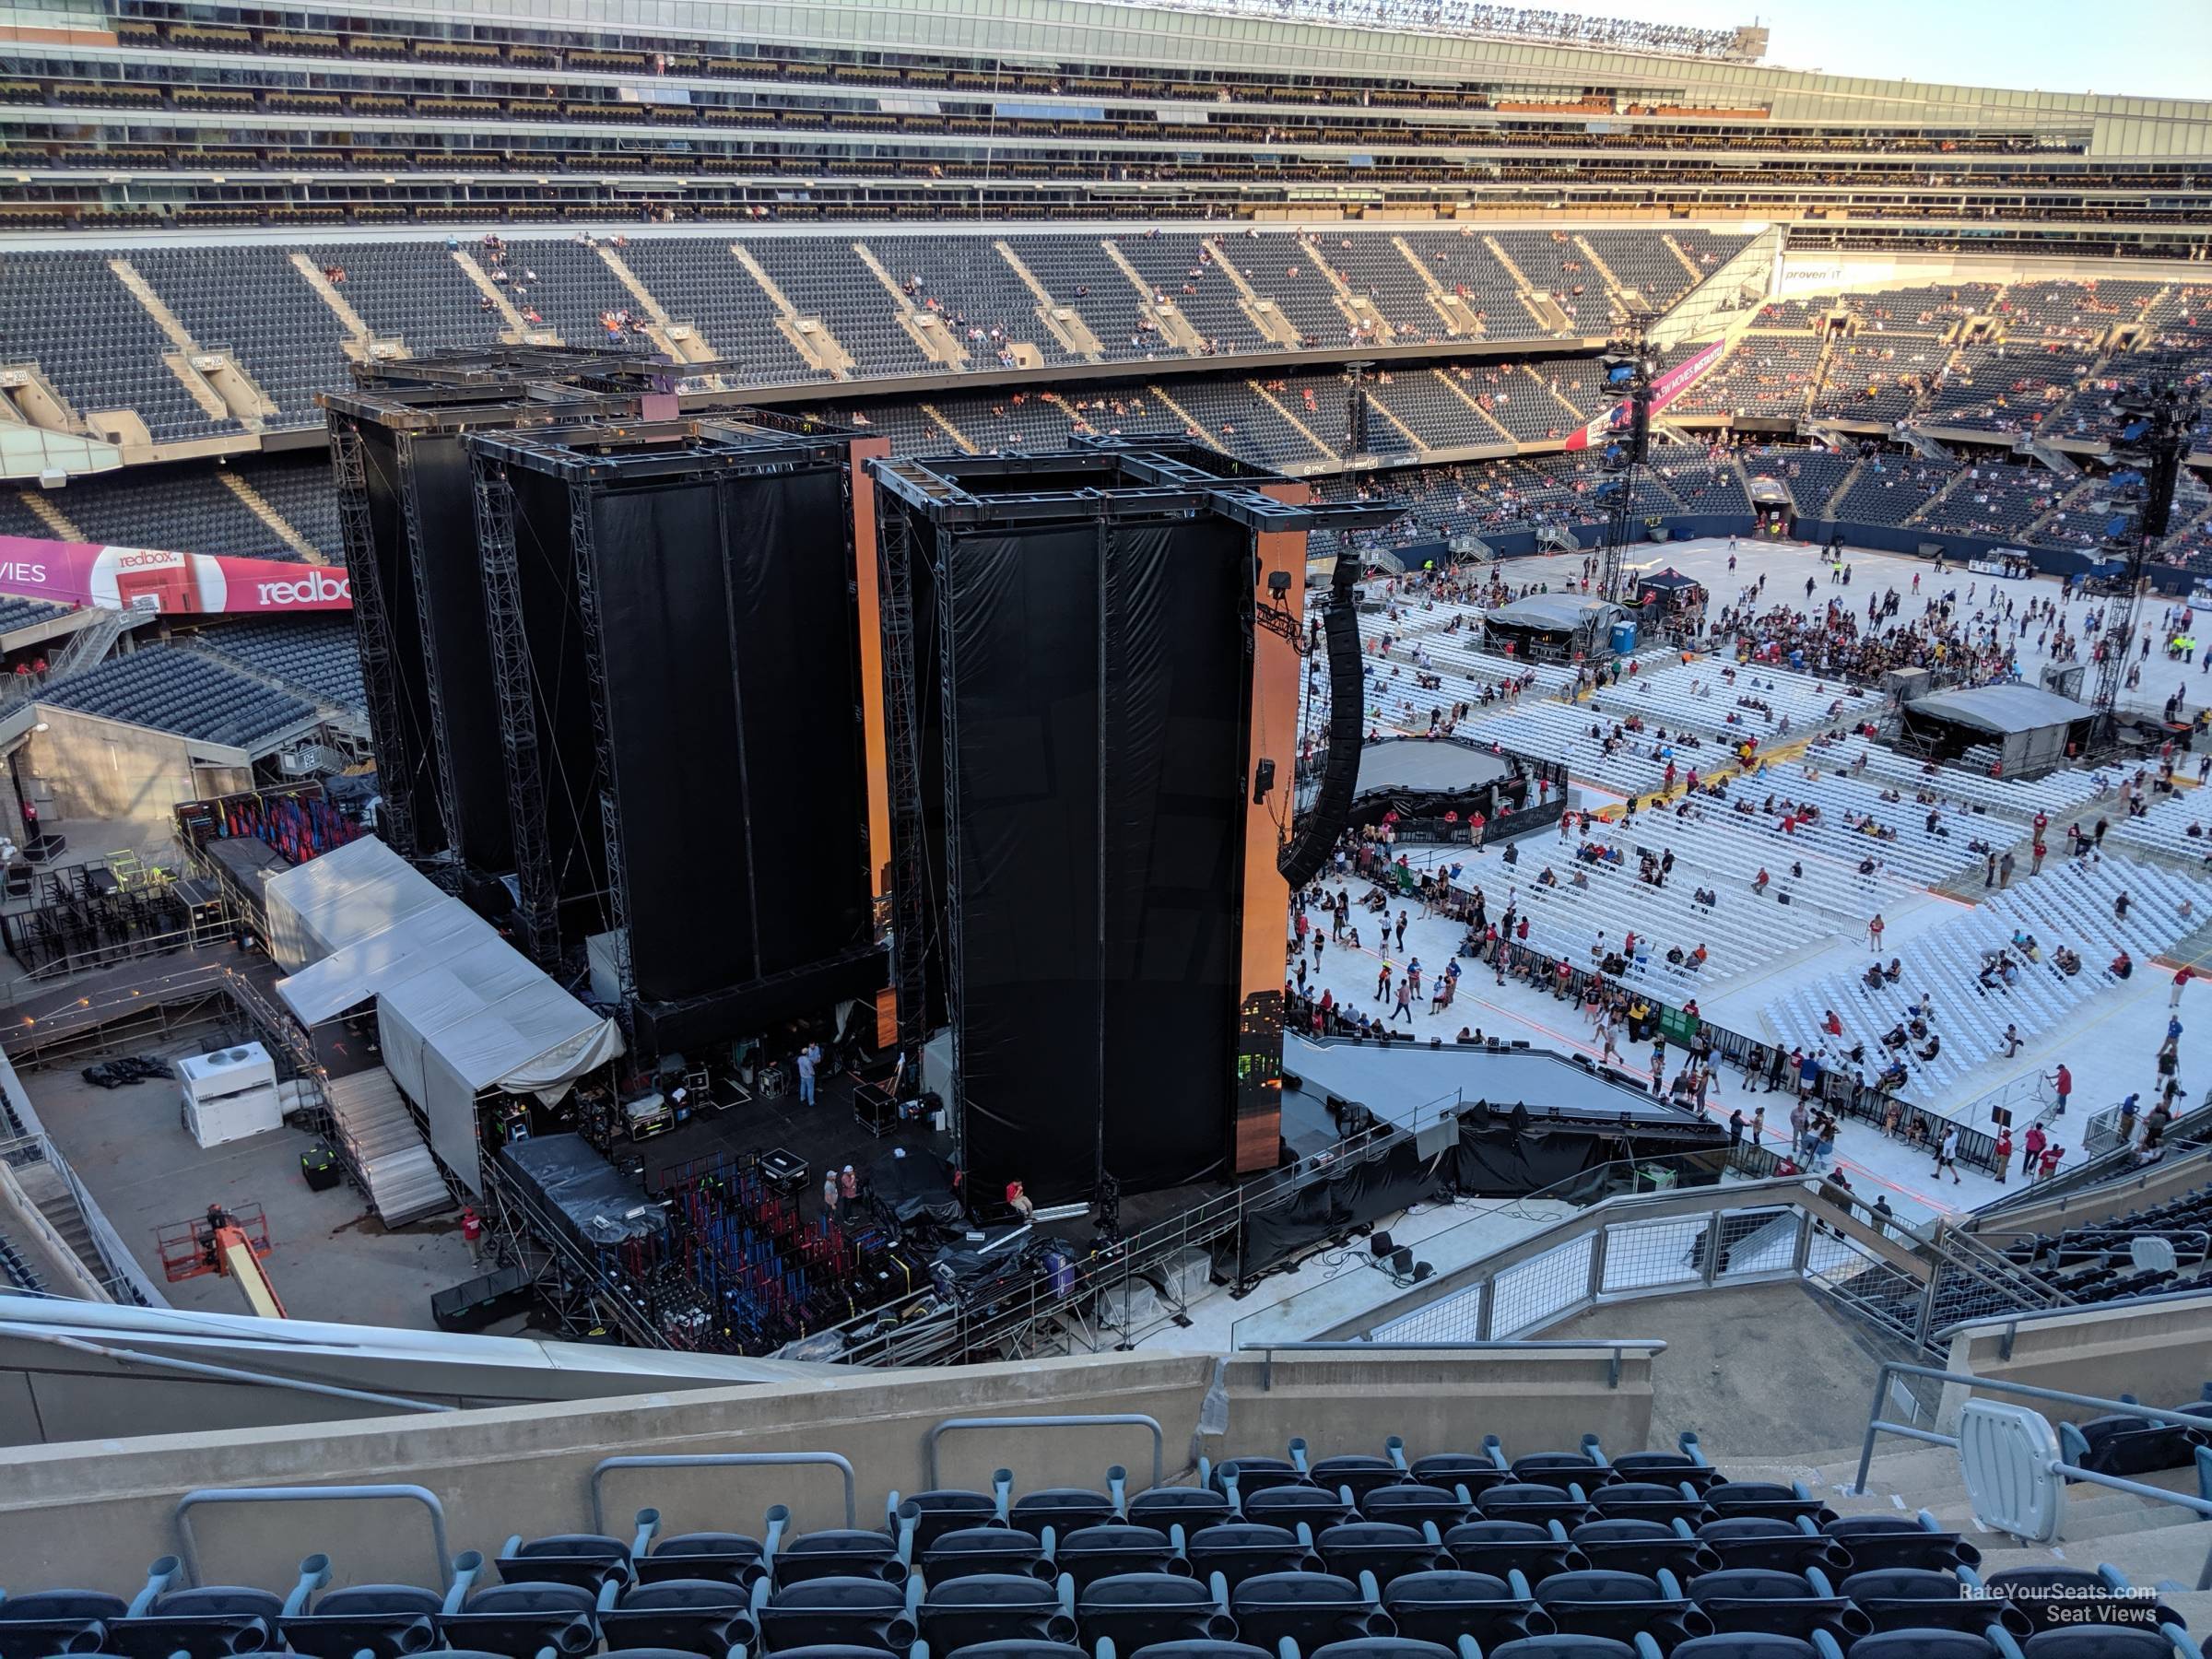 section 445, row 9 seat view  for concert - soldier field